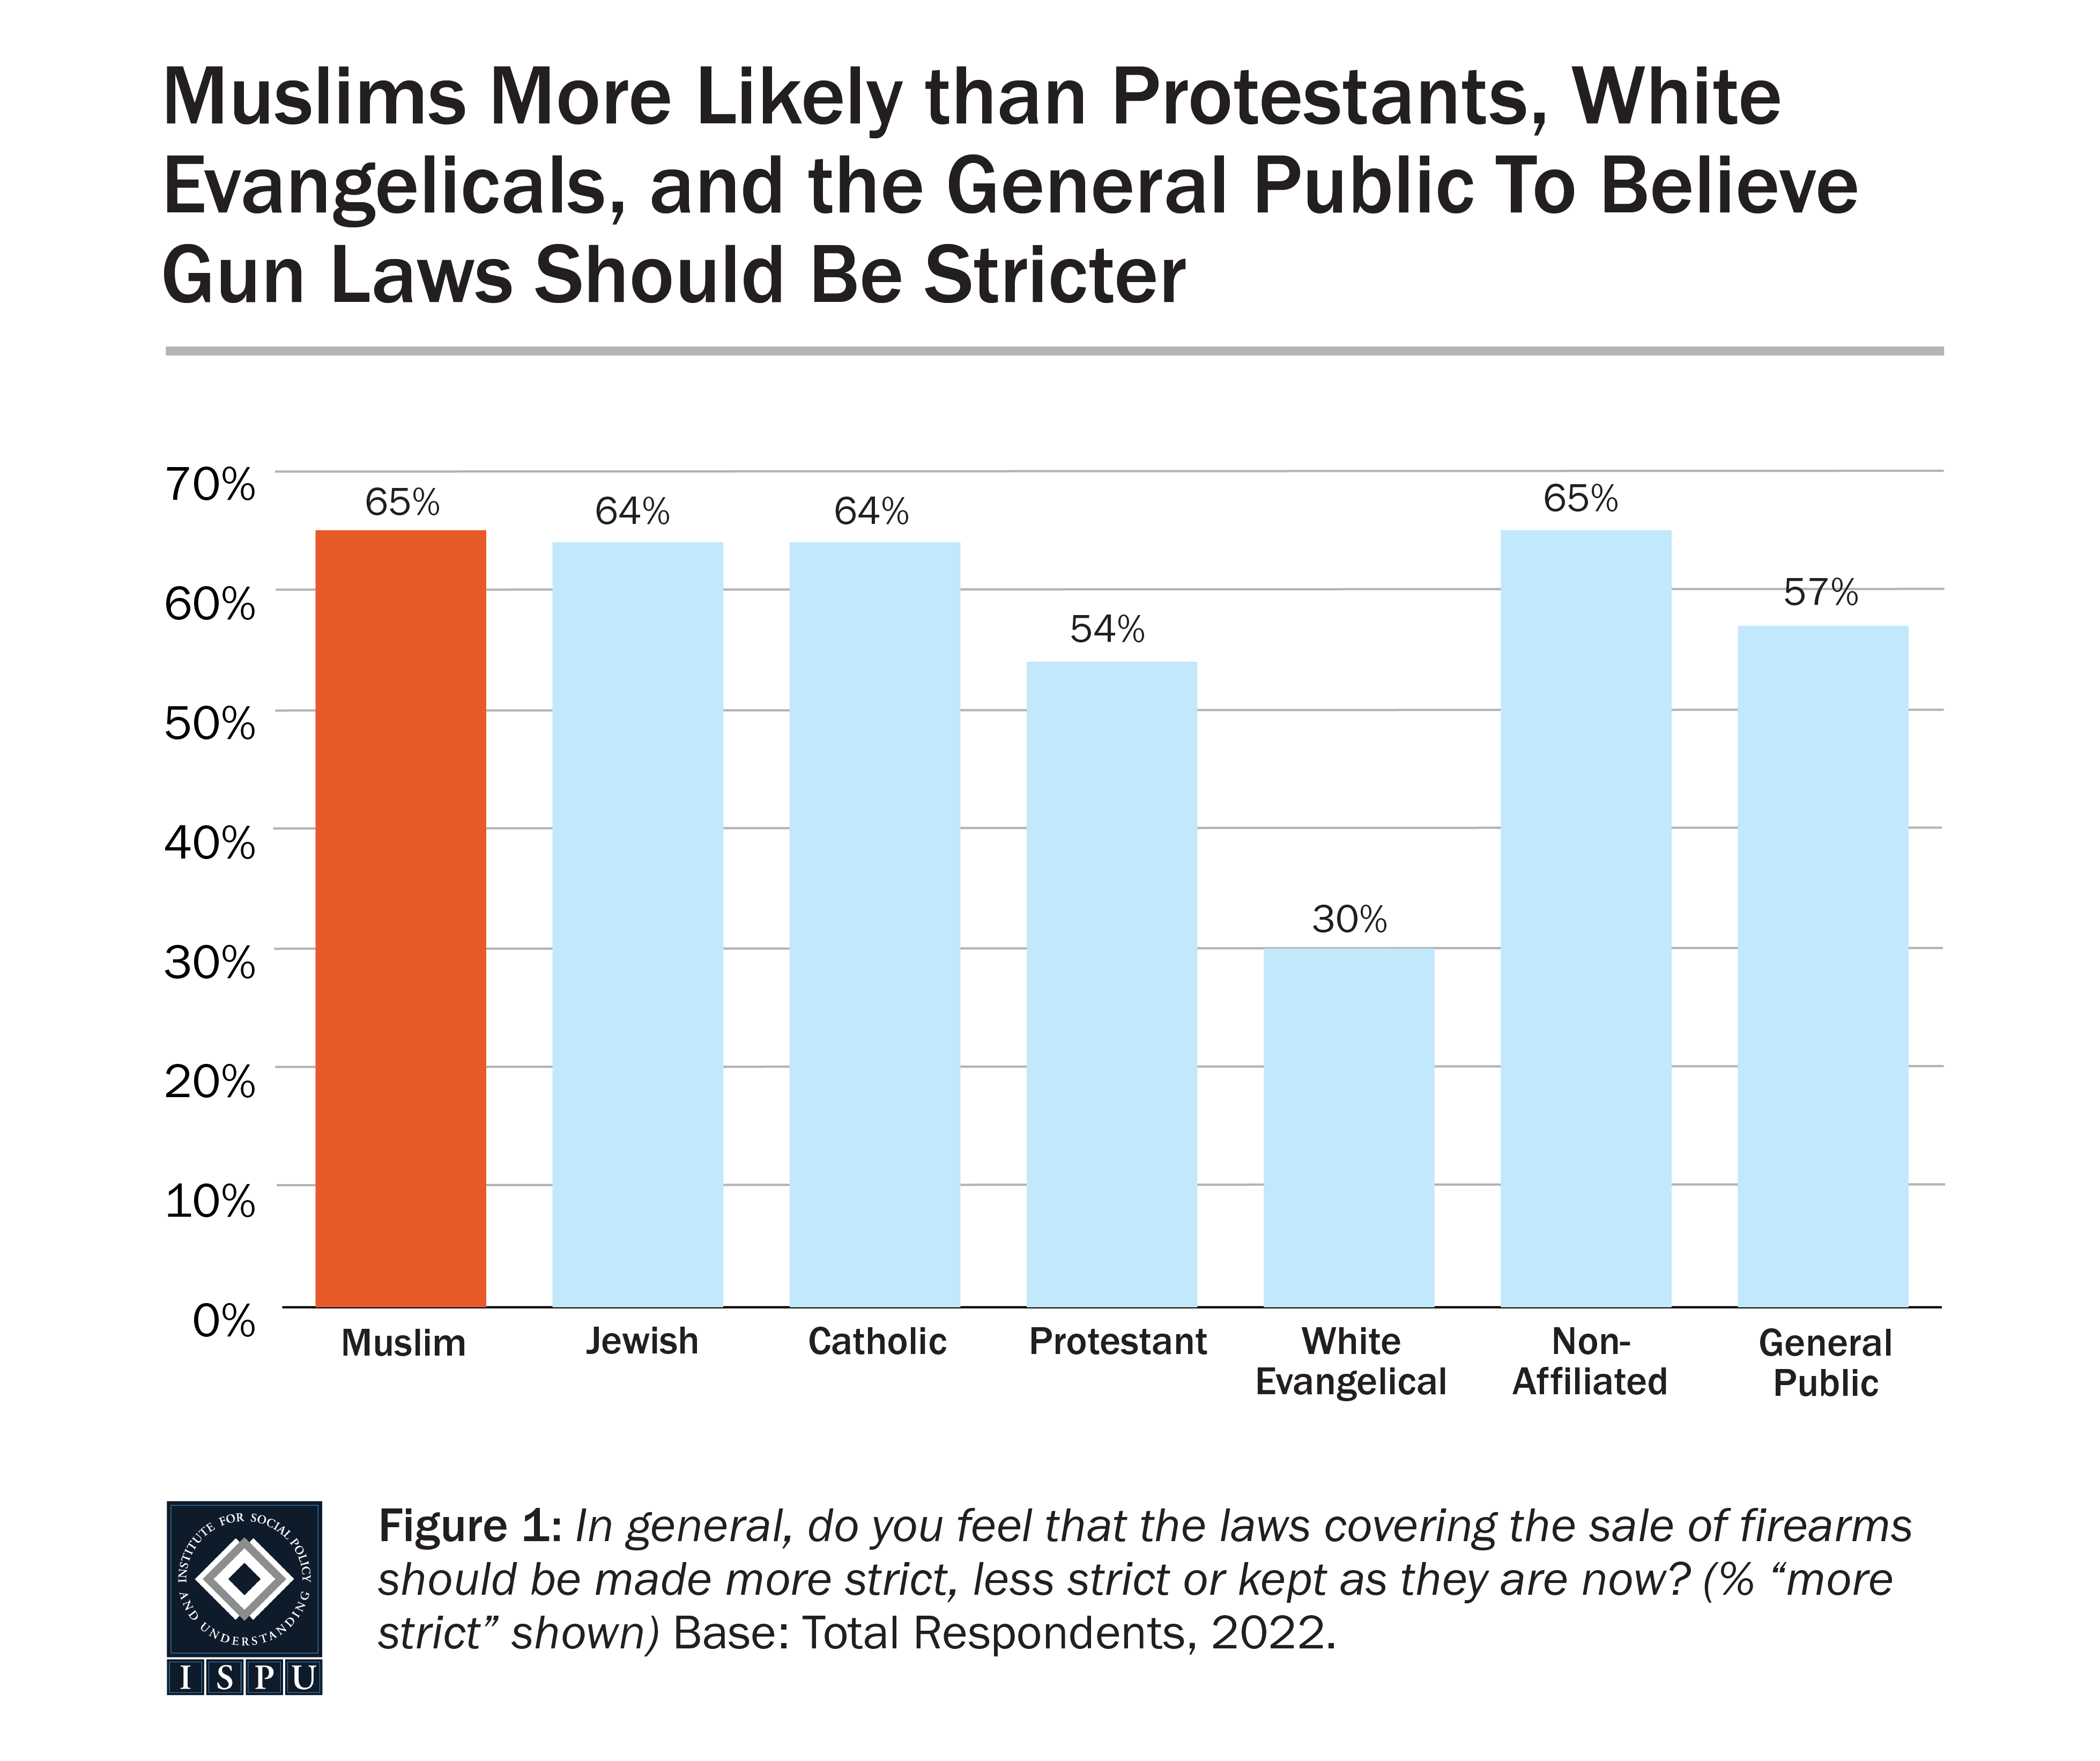 Graph displaying: At 65%, Muslims more likely than all surveyed groups, besides non-affiliated, to believe gun laws should be stricter